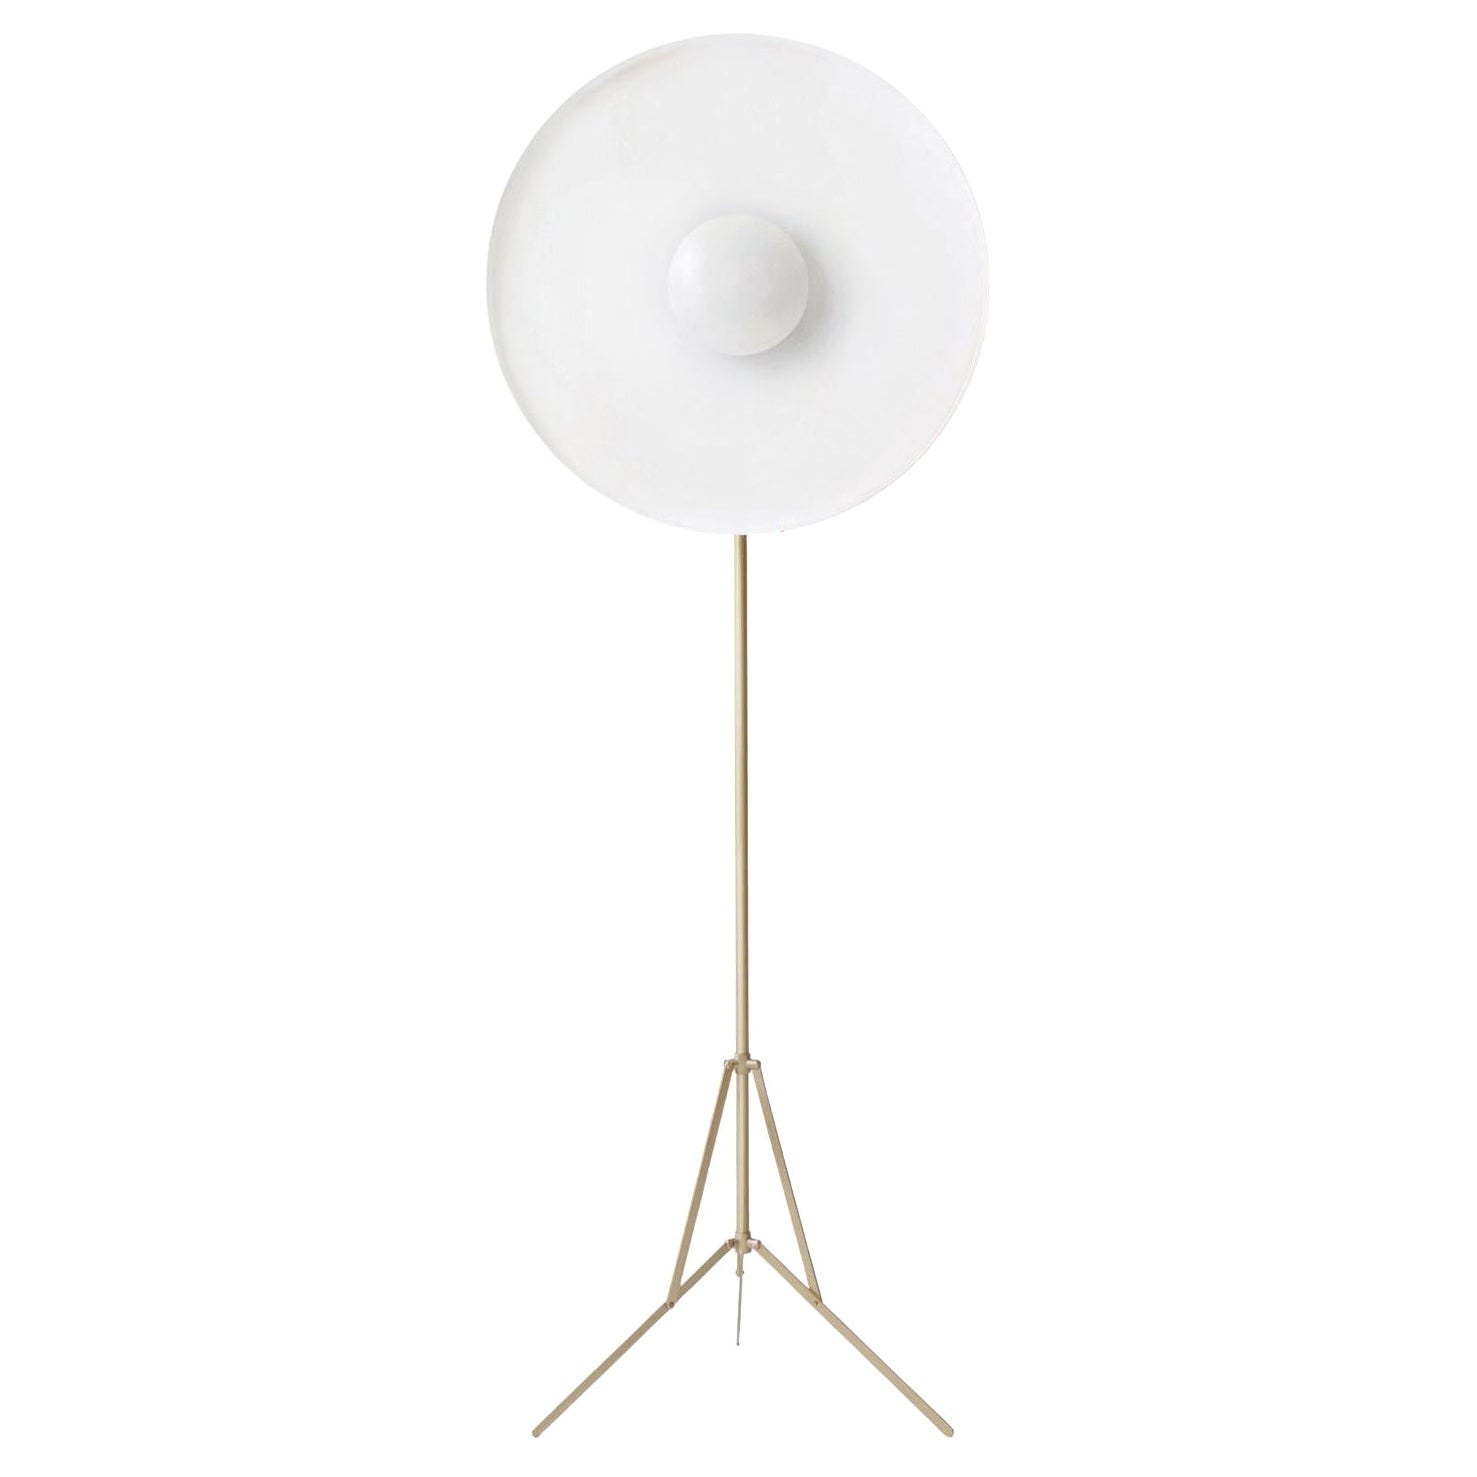 Parabola Copper Floor Lamp and White Disk, Atelier Biagetti